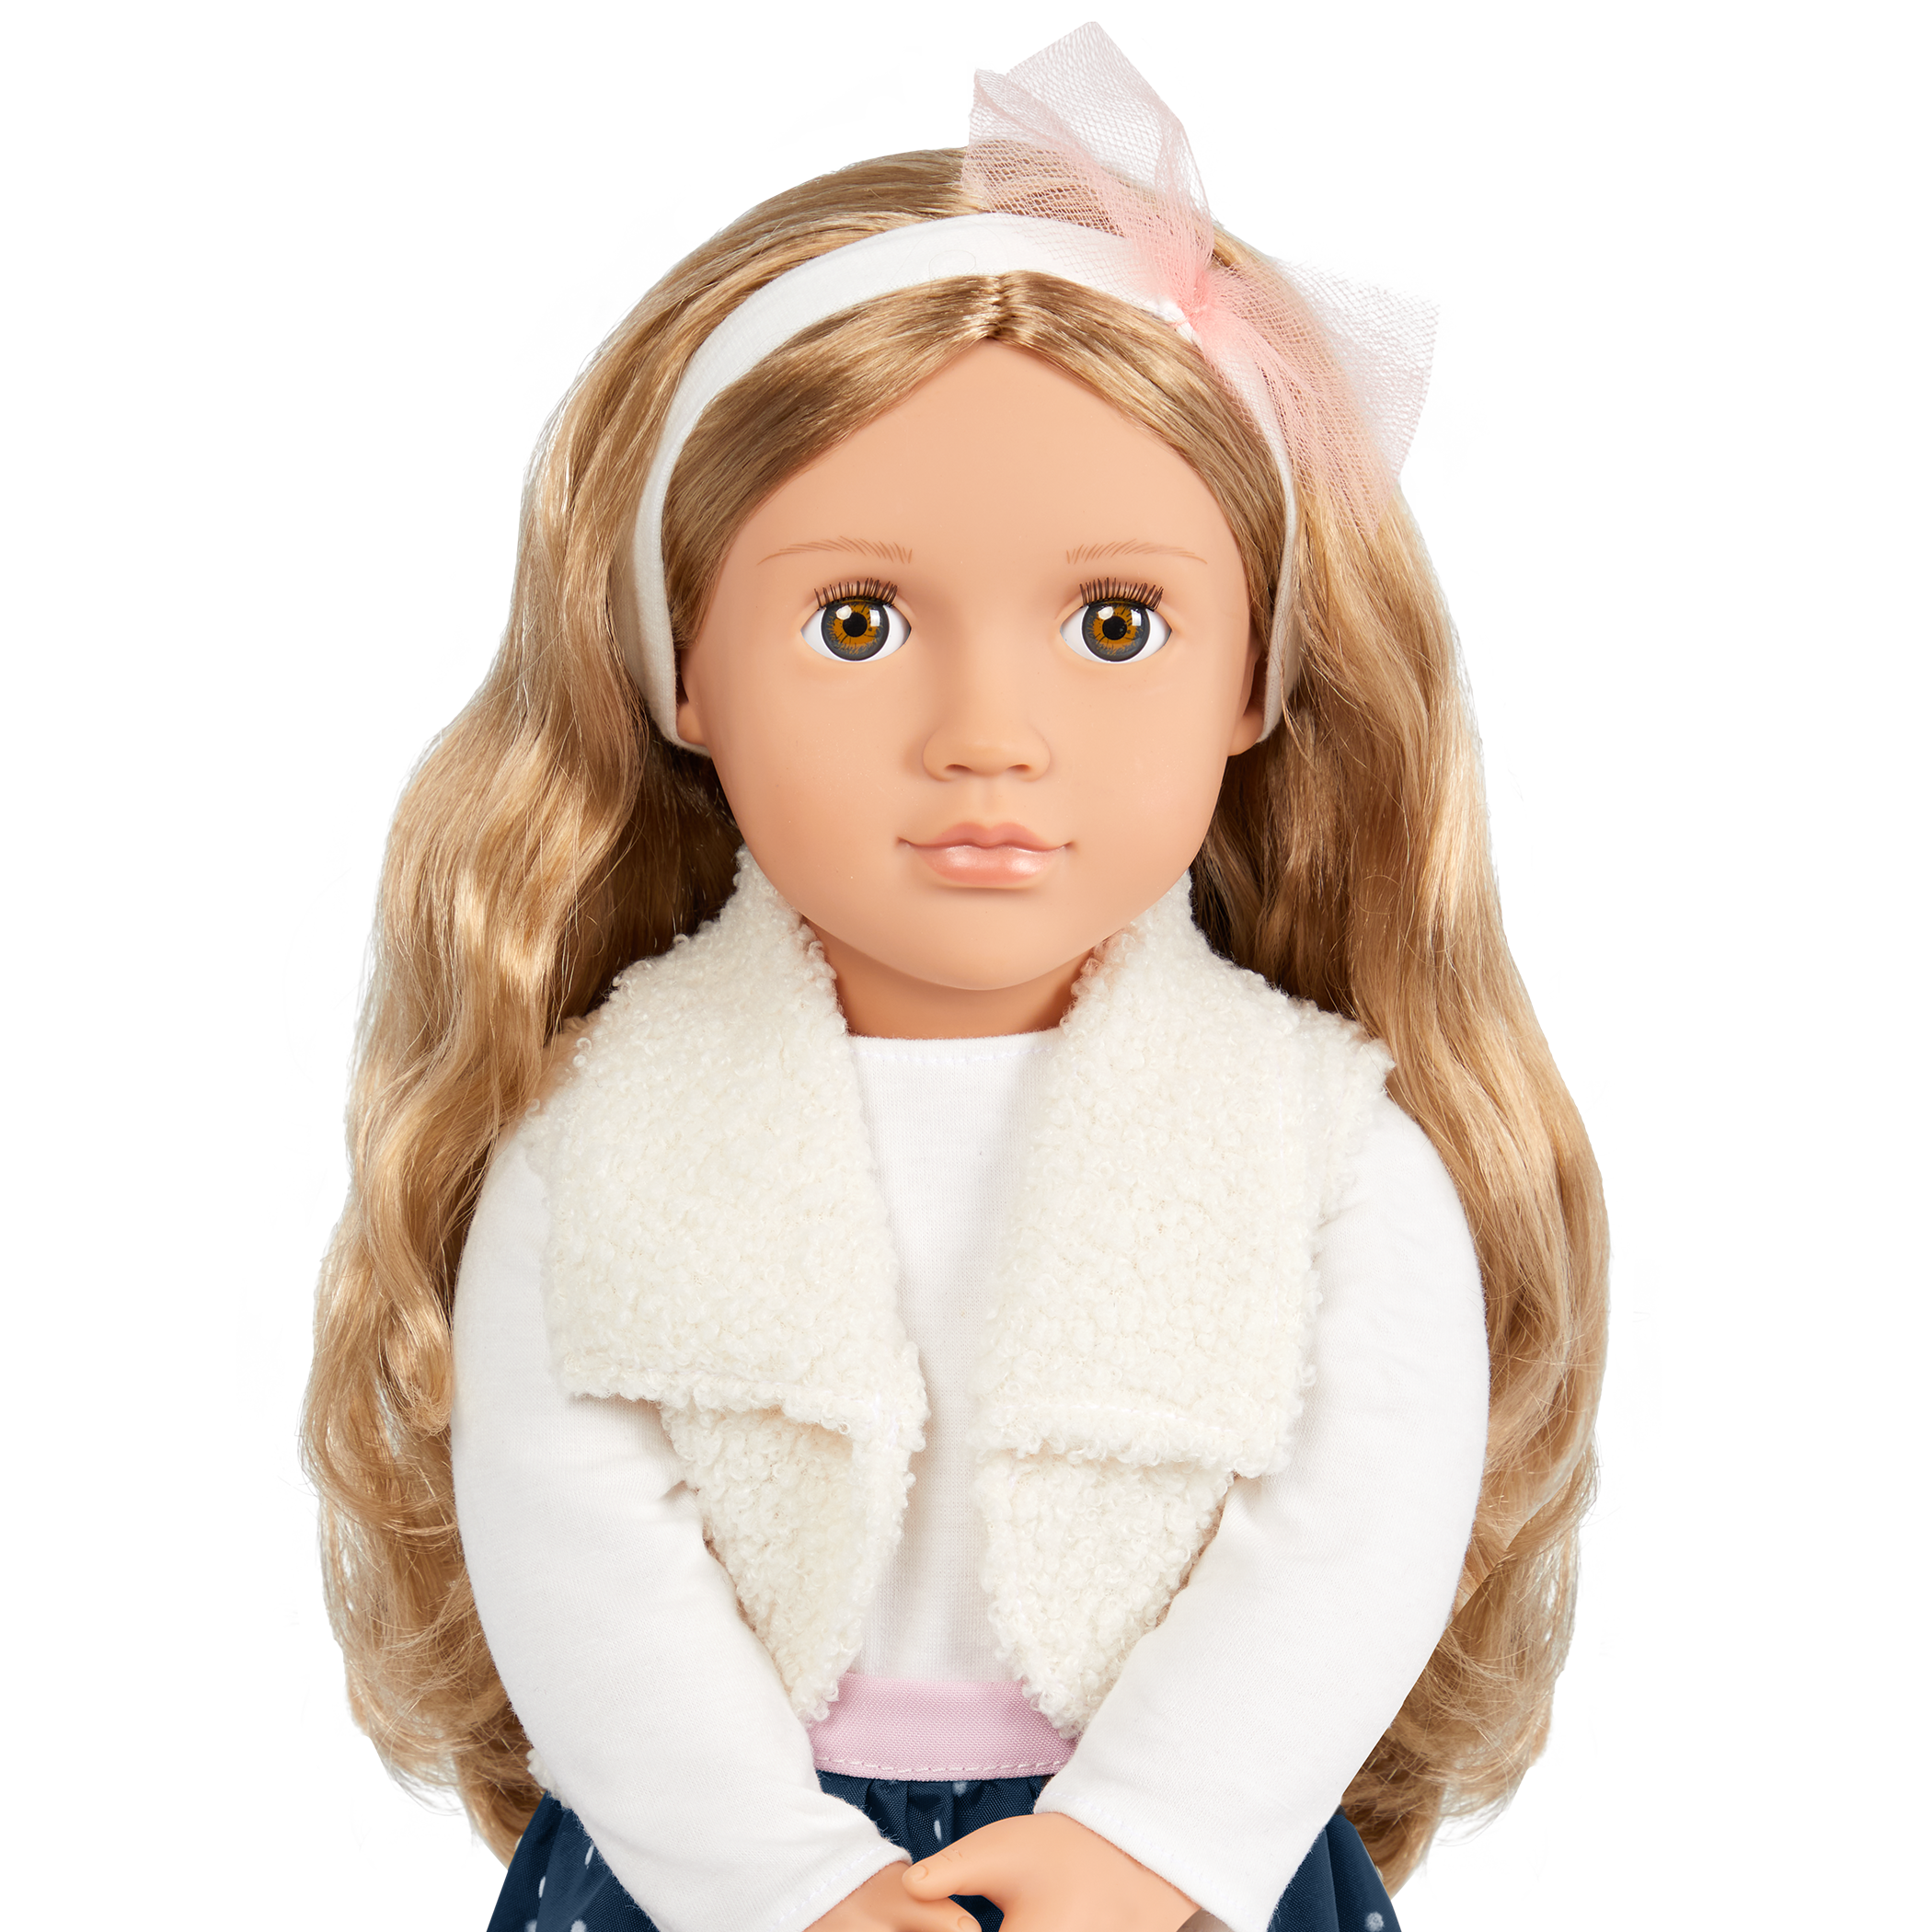 Our Generation 18-inch Fashion Doll Julie-Marie